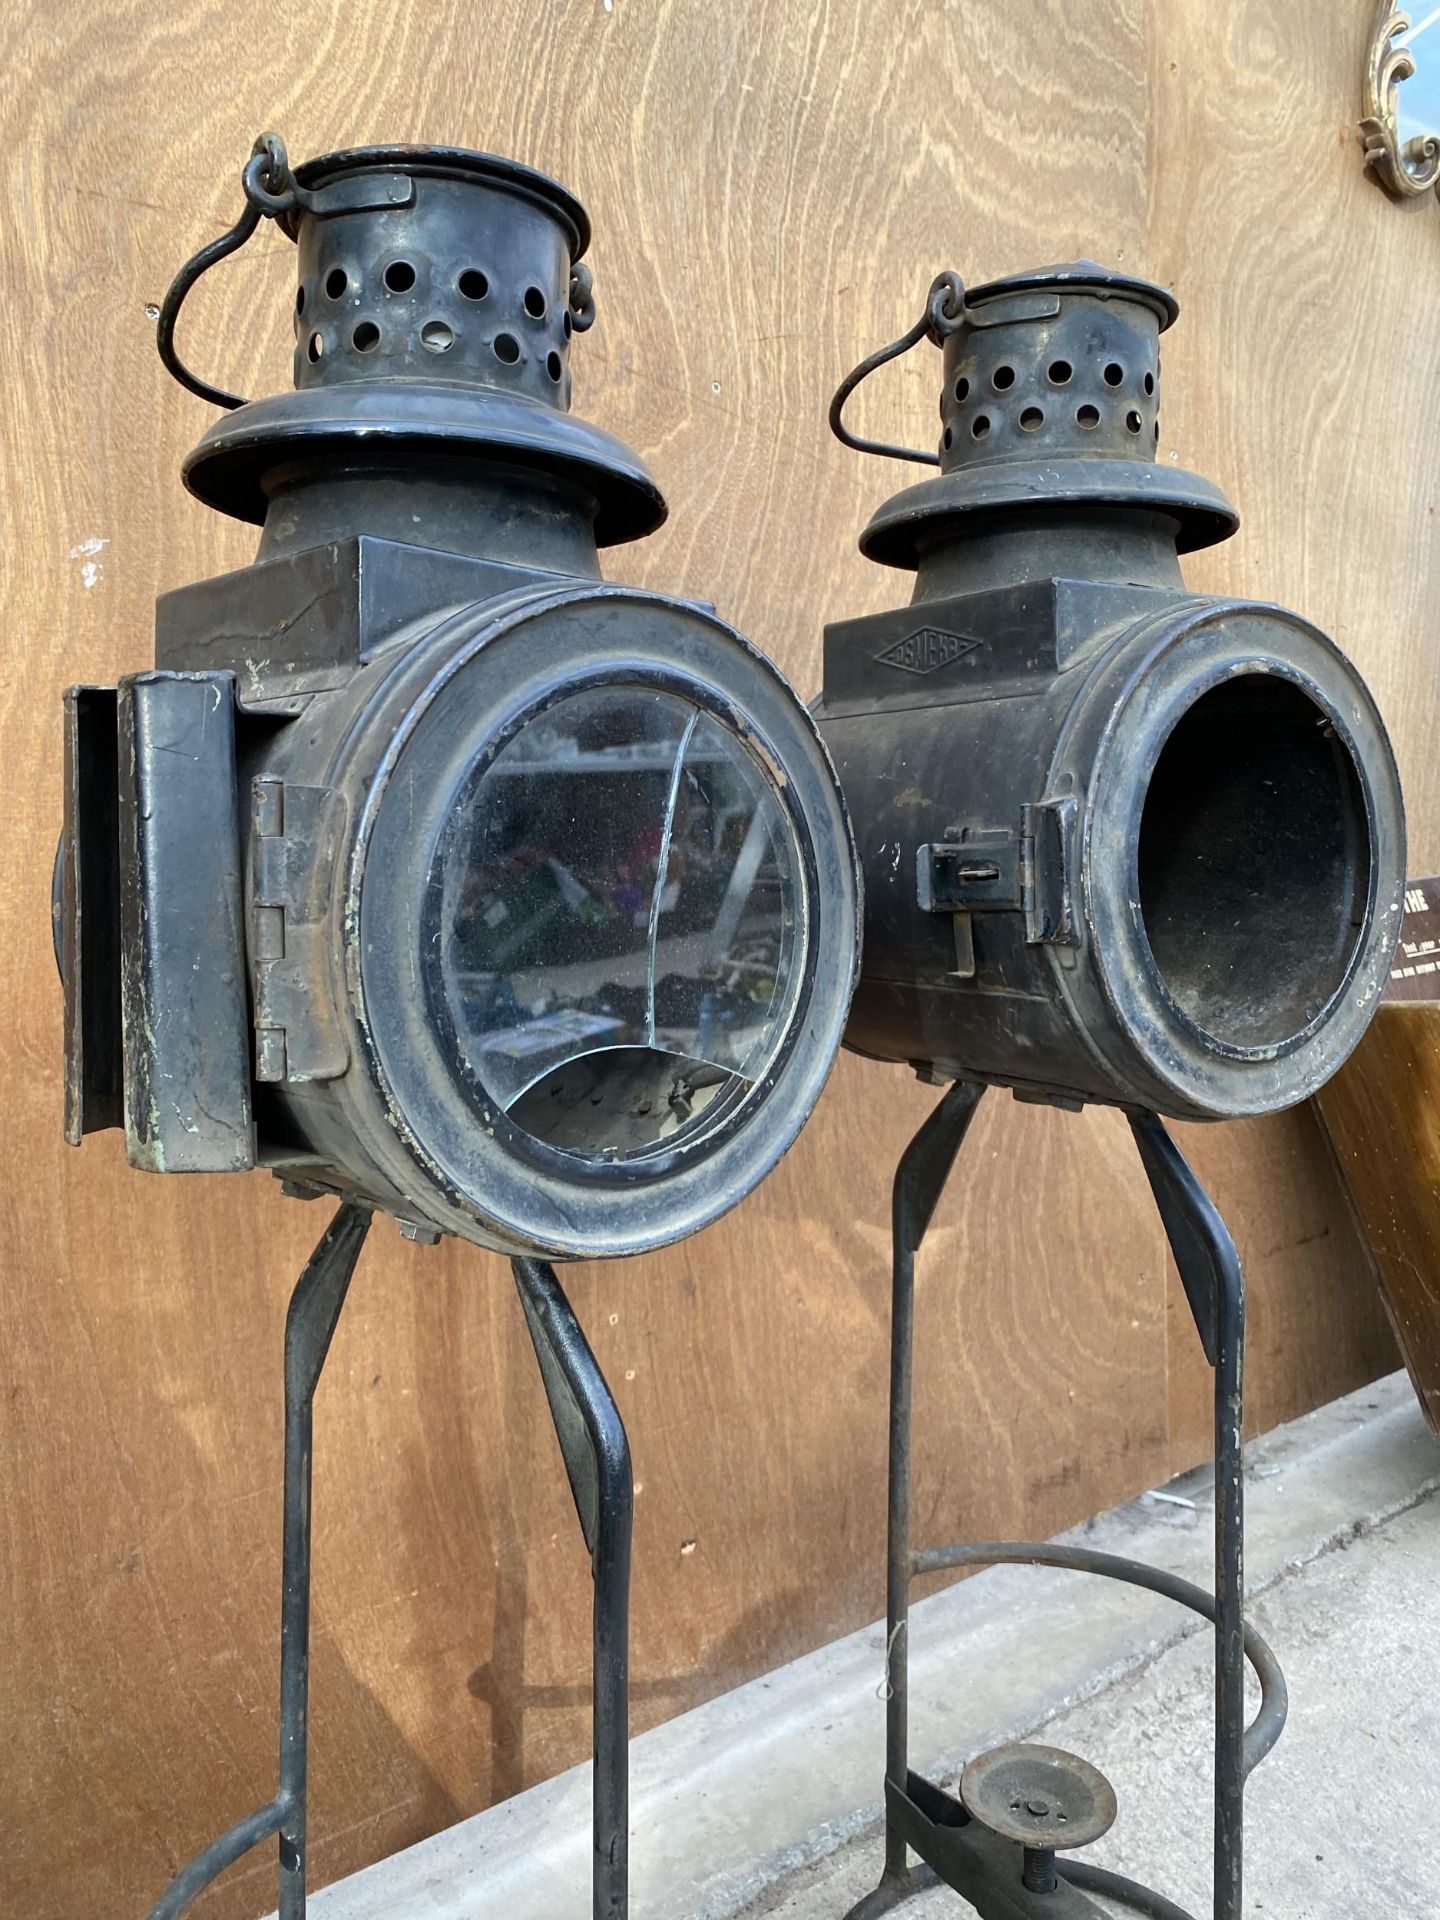 A PAIR OF VINTAGE AND RARE GERMAN RAILWAY LAMPS - Image 2 of 4